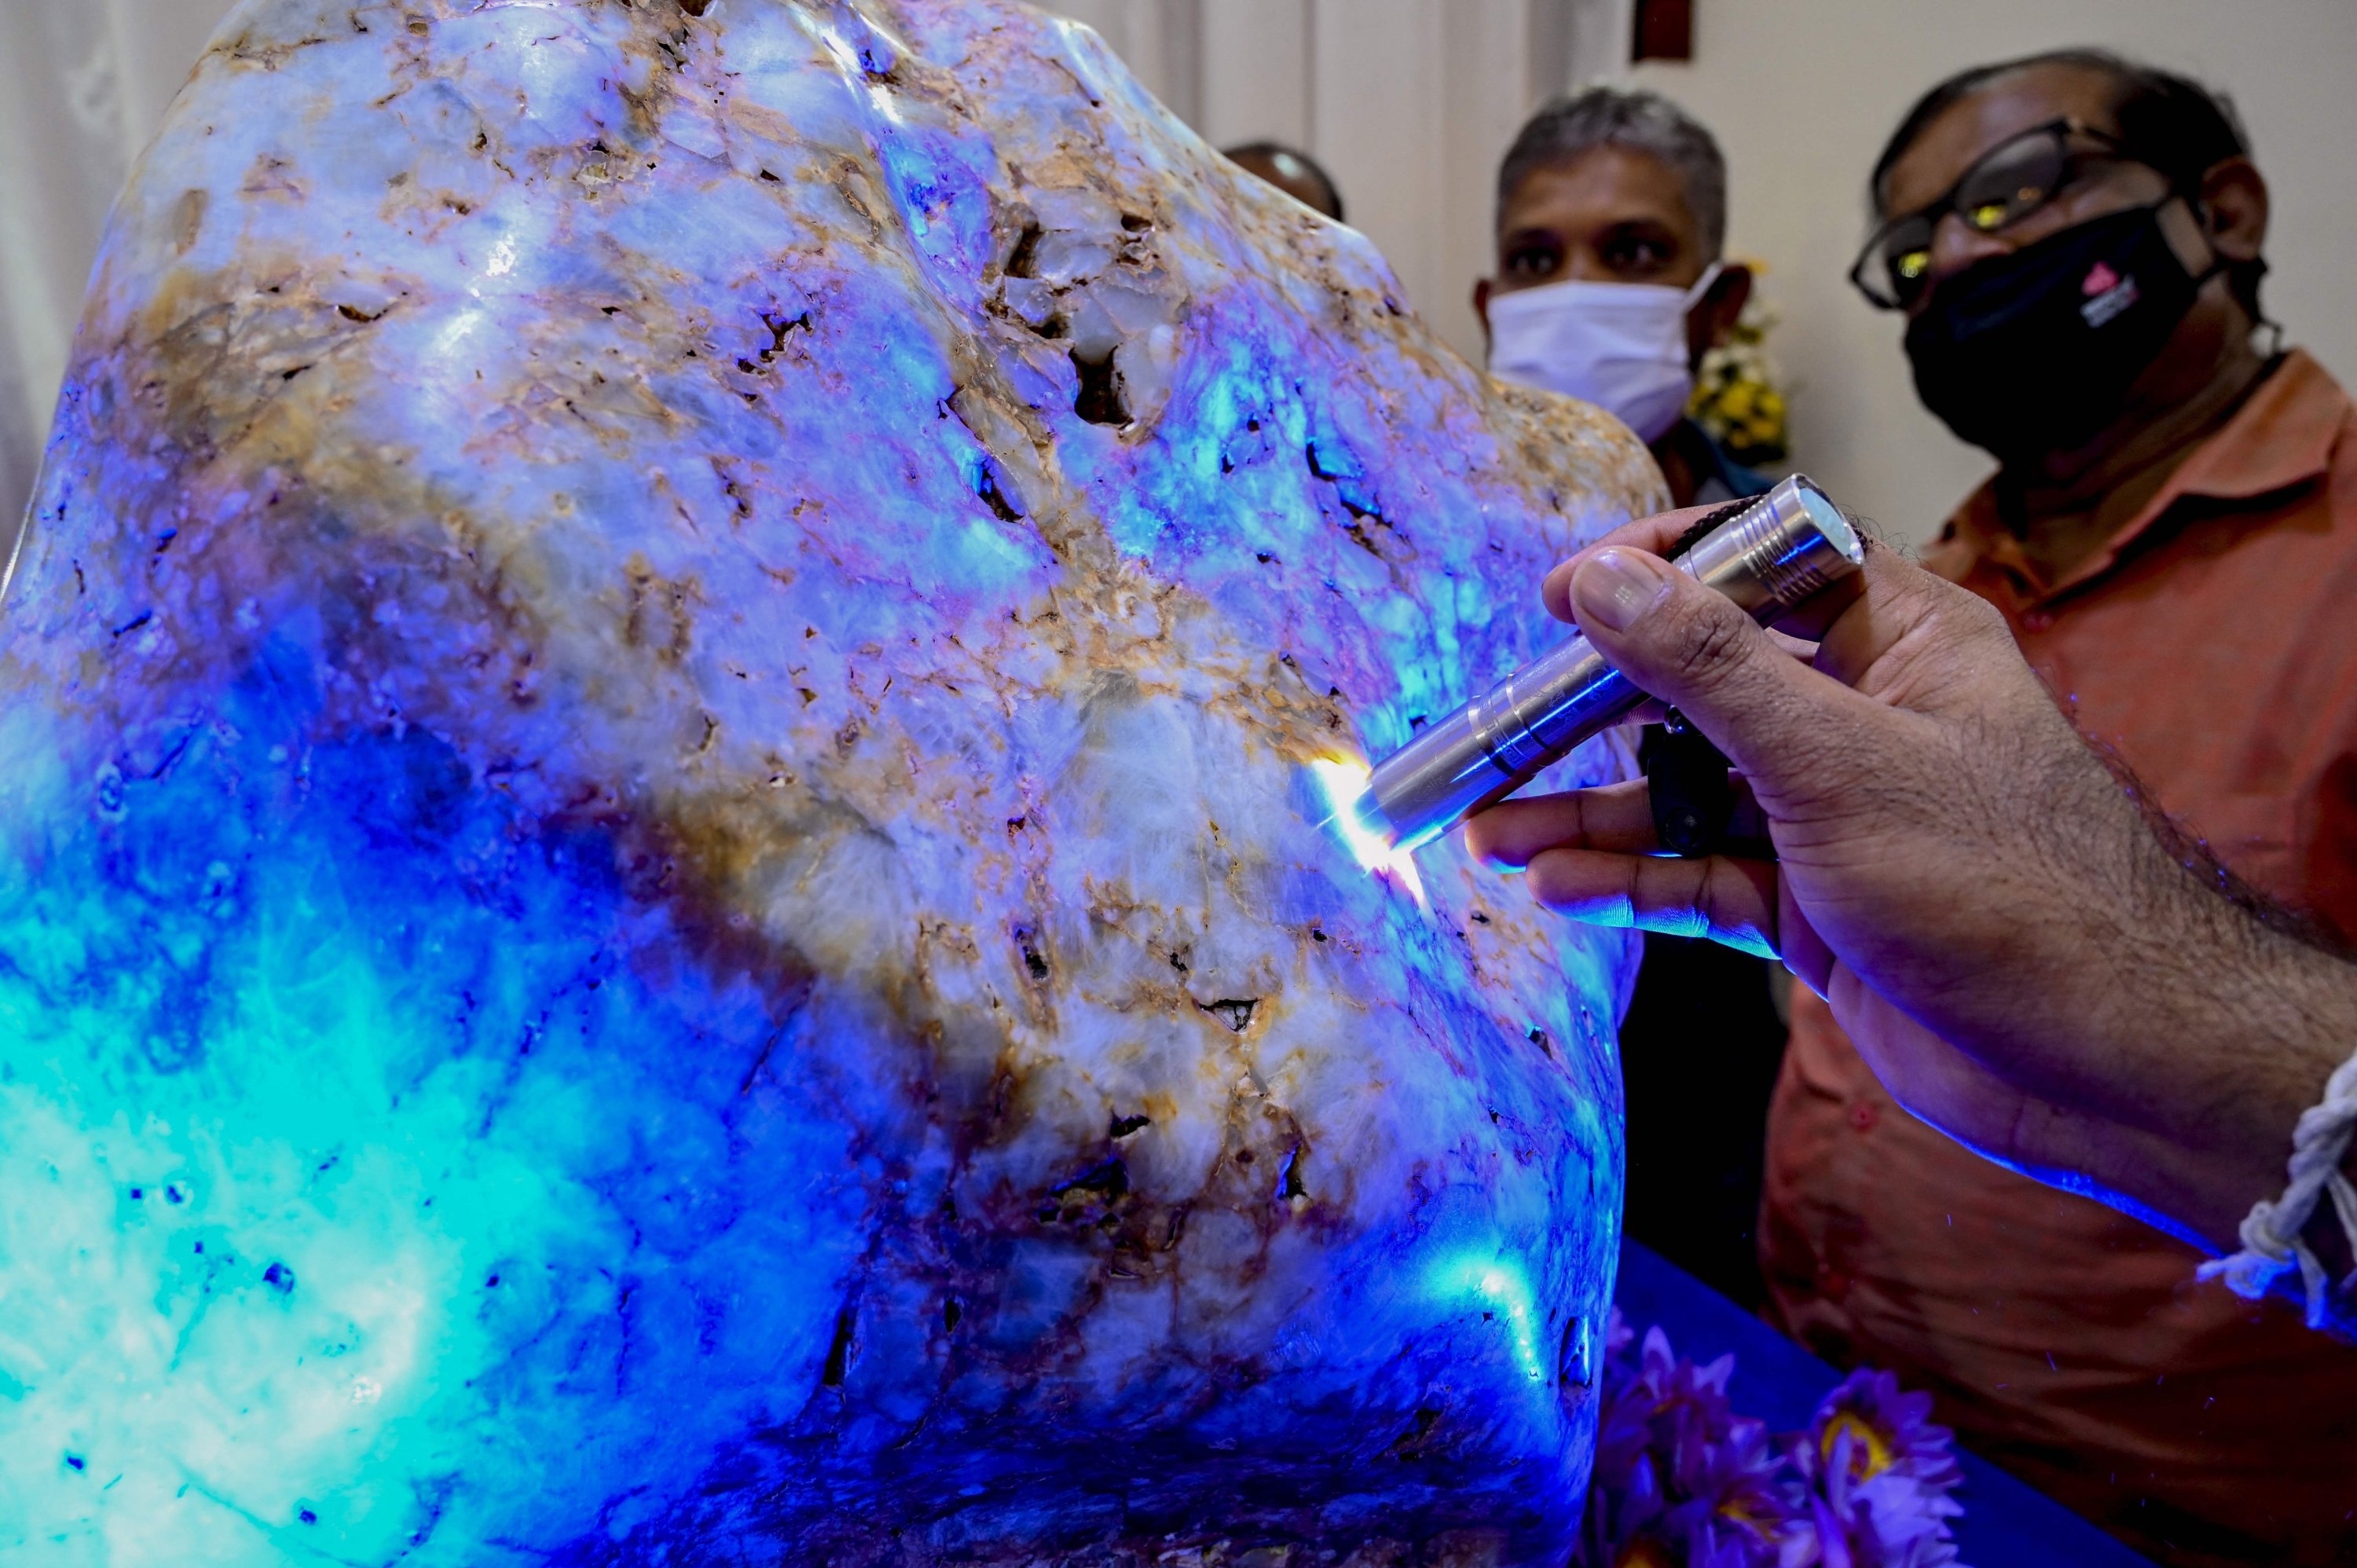 People inspect the single natural corundum (blue sapphire) named 'Queen of Asia,' considered the largest found in the world, in Horana, some 45 kilometers from Colombo, Sri Lanka, Dec. 12, 2021. (AFP Photo)